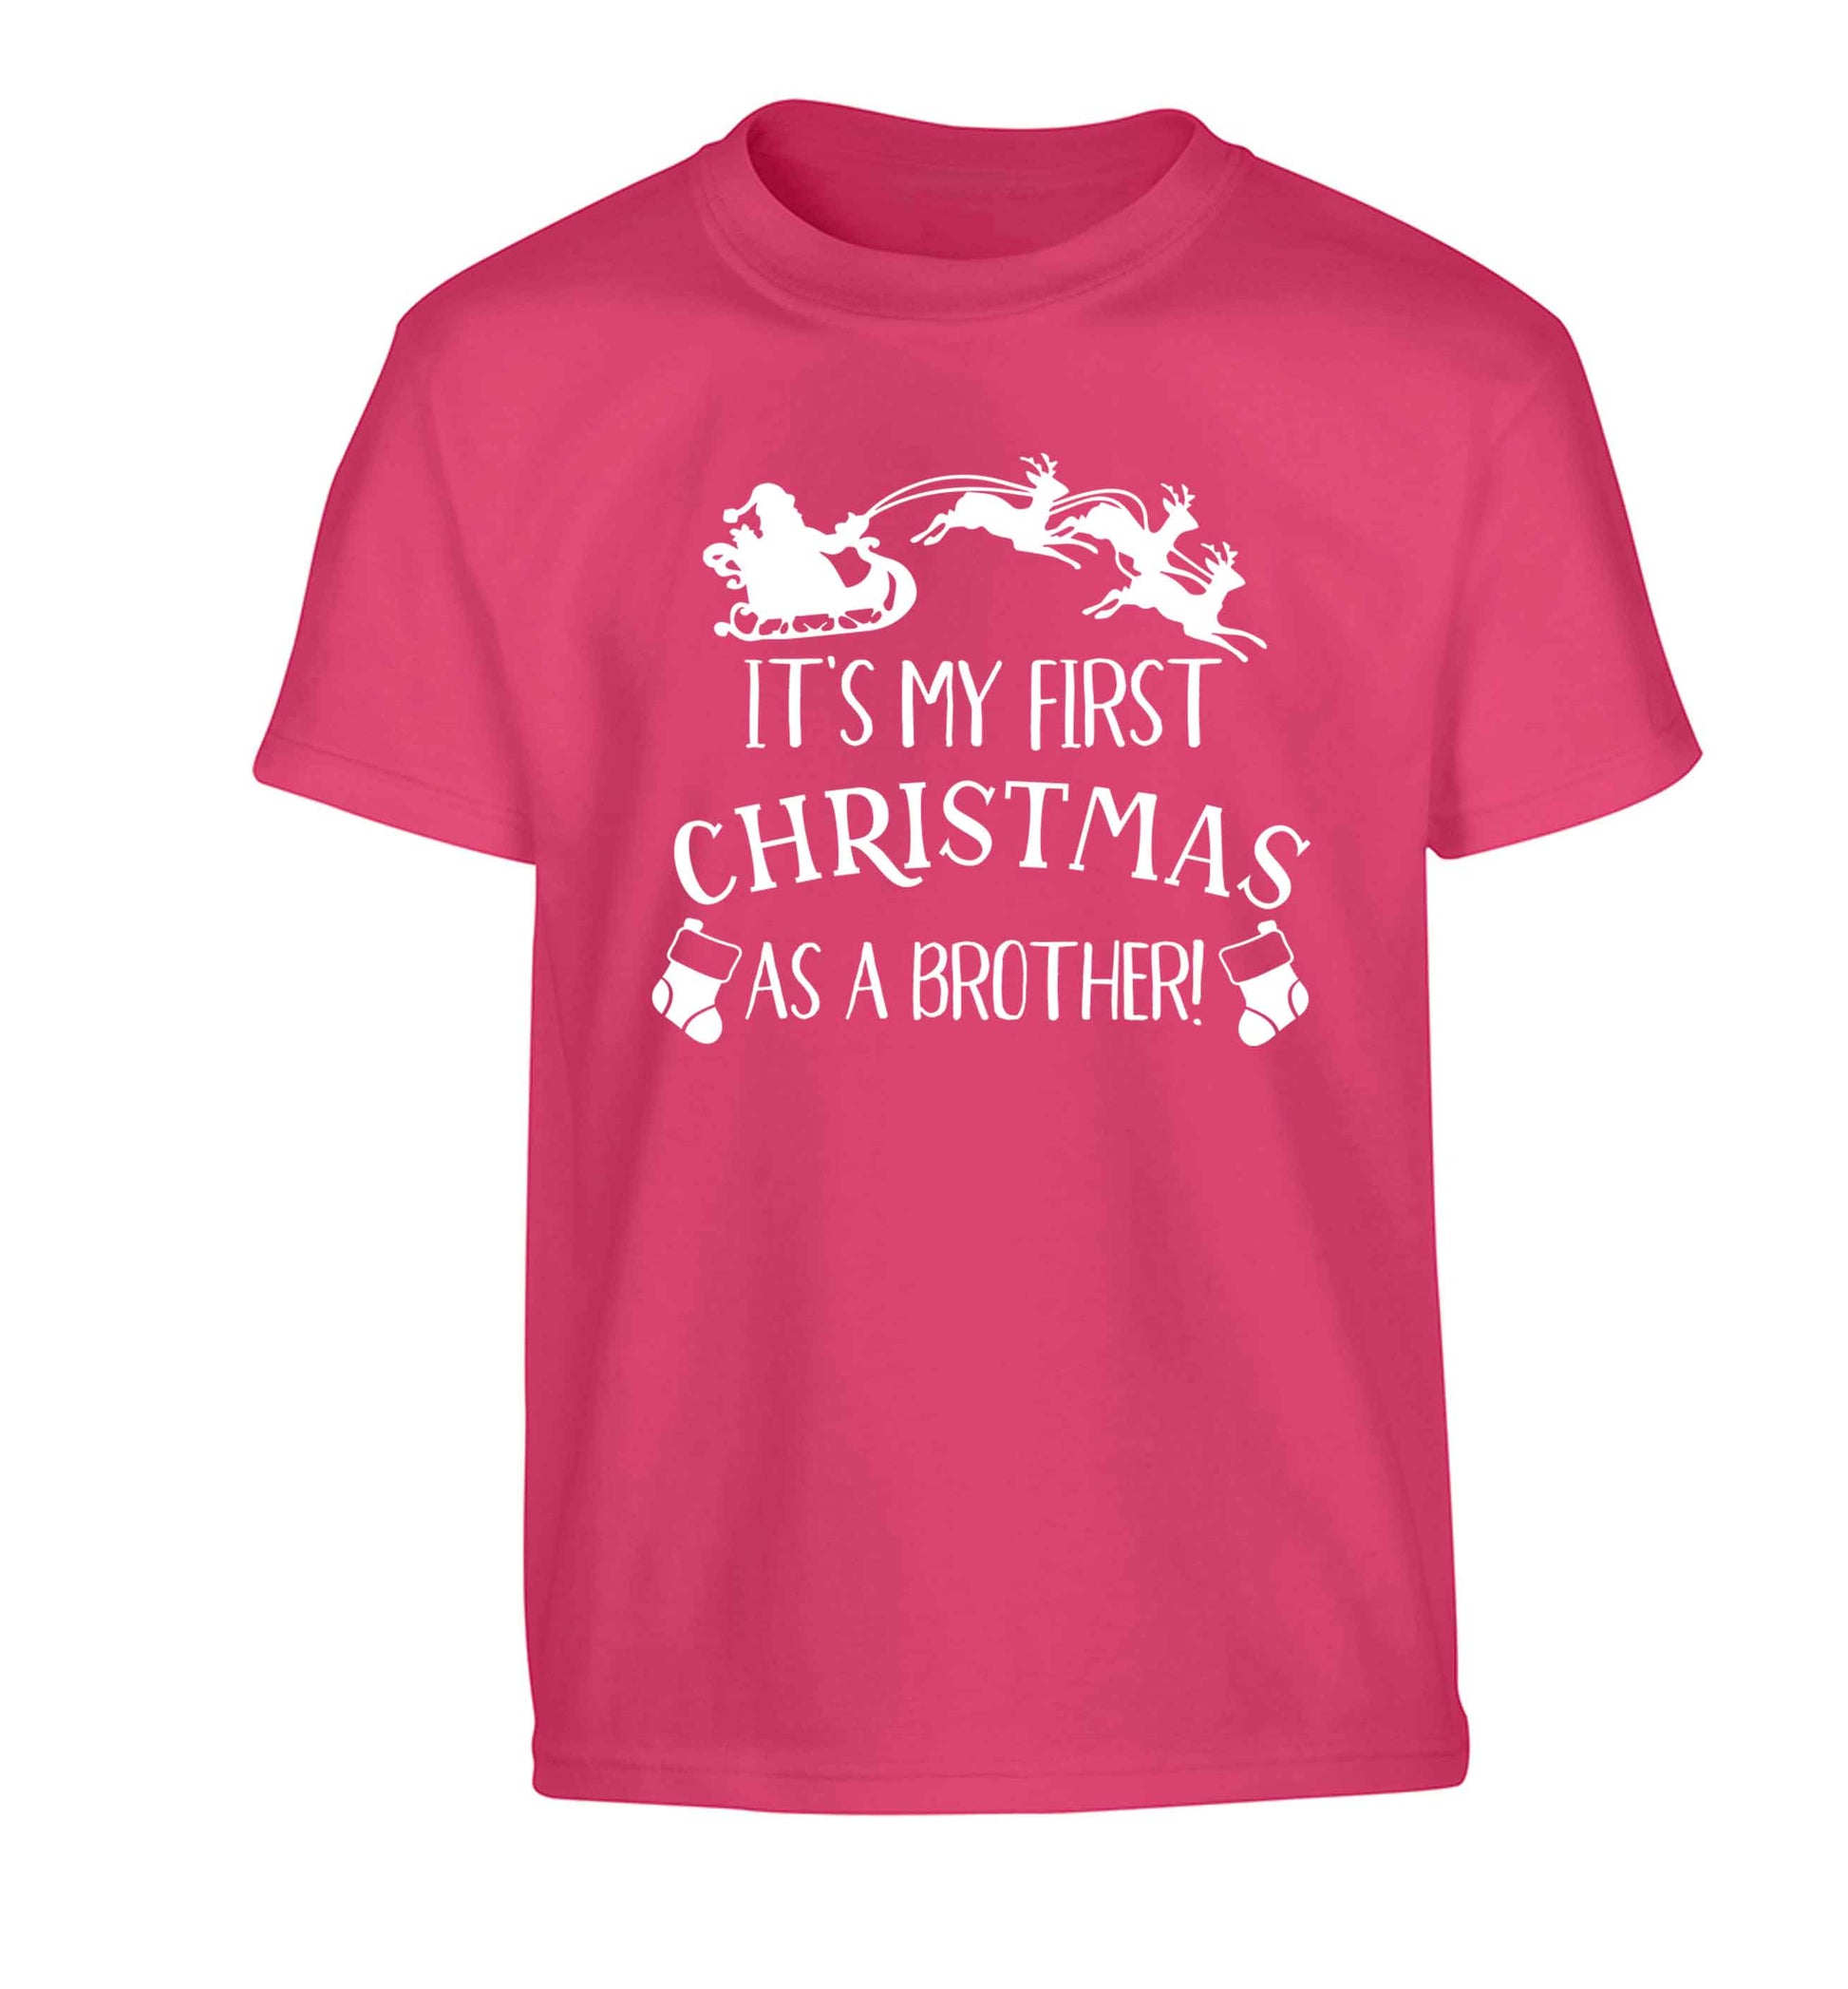 It's my first Christmas as a brother! Children's pink Tshirt 12-13 Years